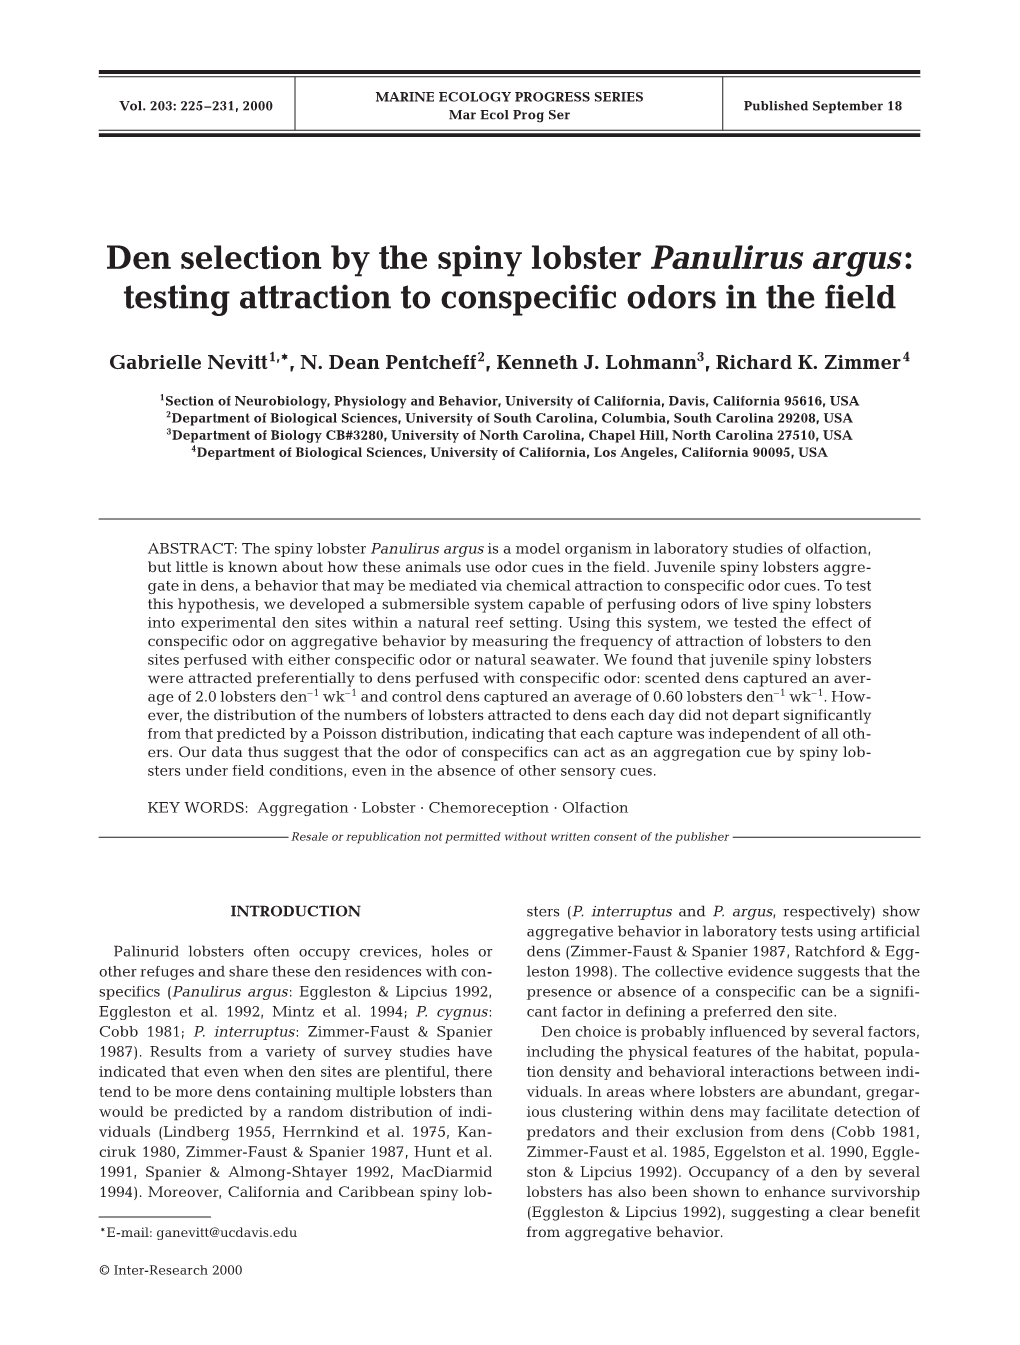 Den Selection by the Spiny Lobster Panulirus Argus: Testing Attraction to Conspecific Odors in the Field